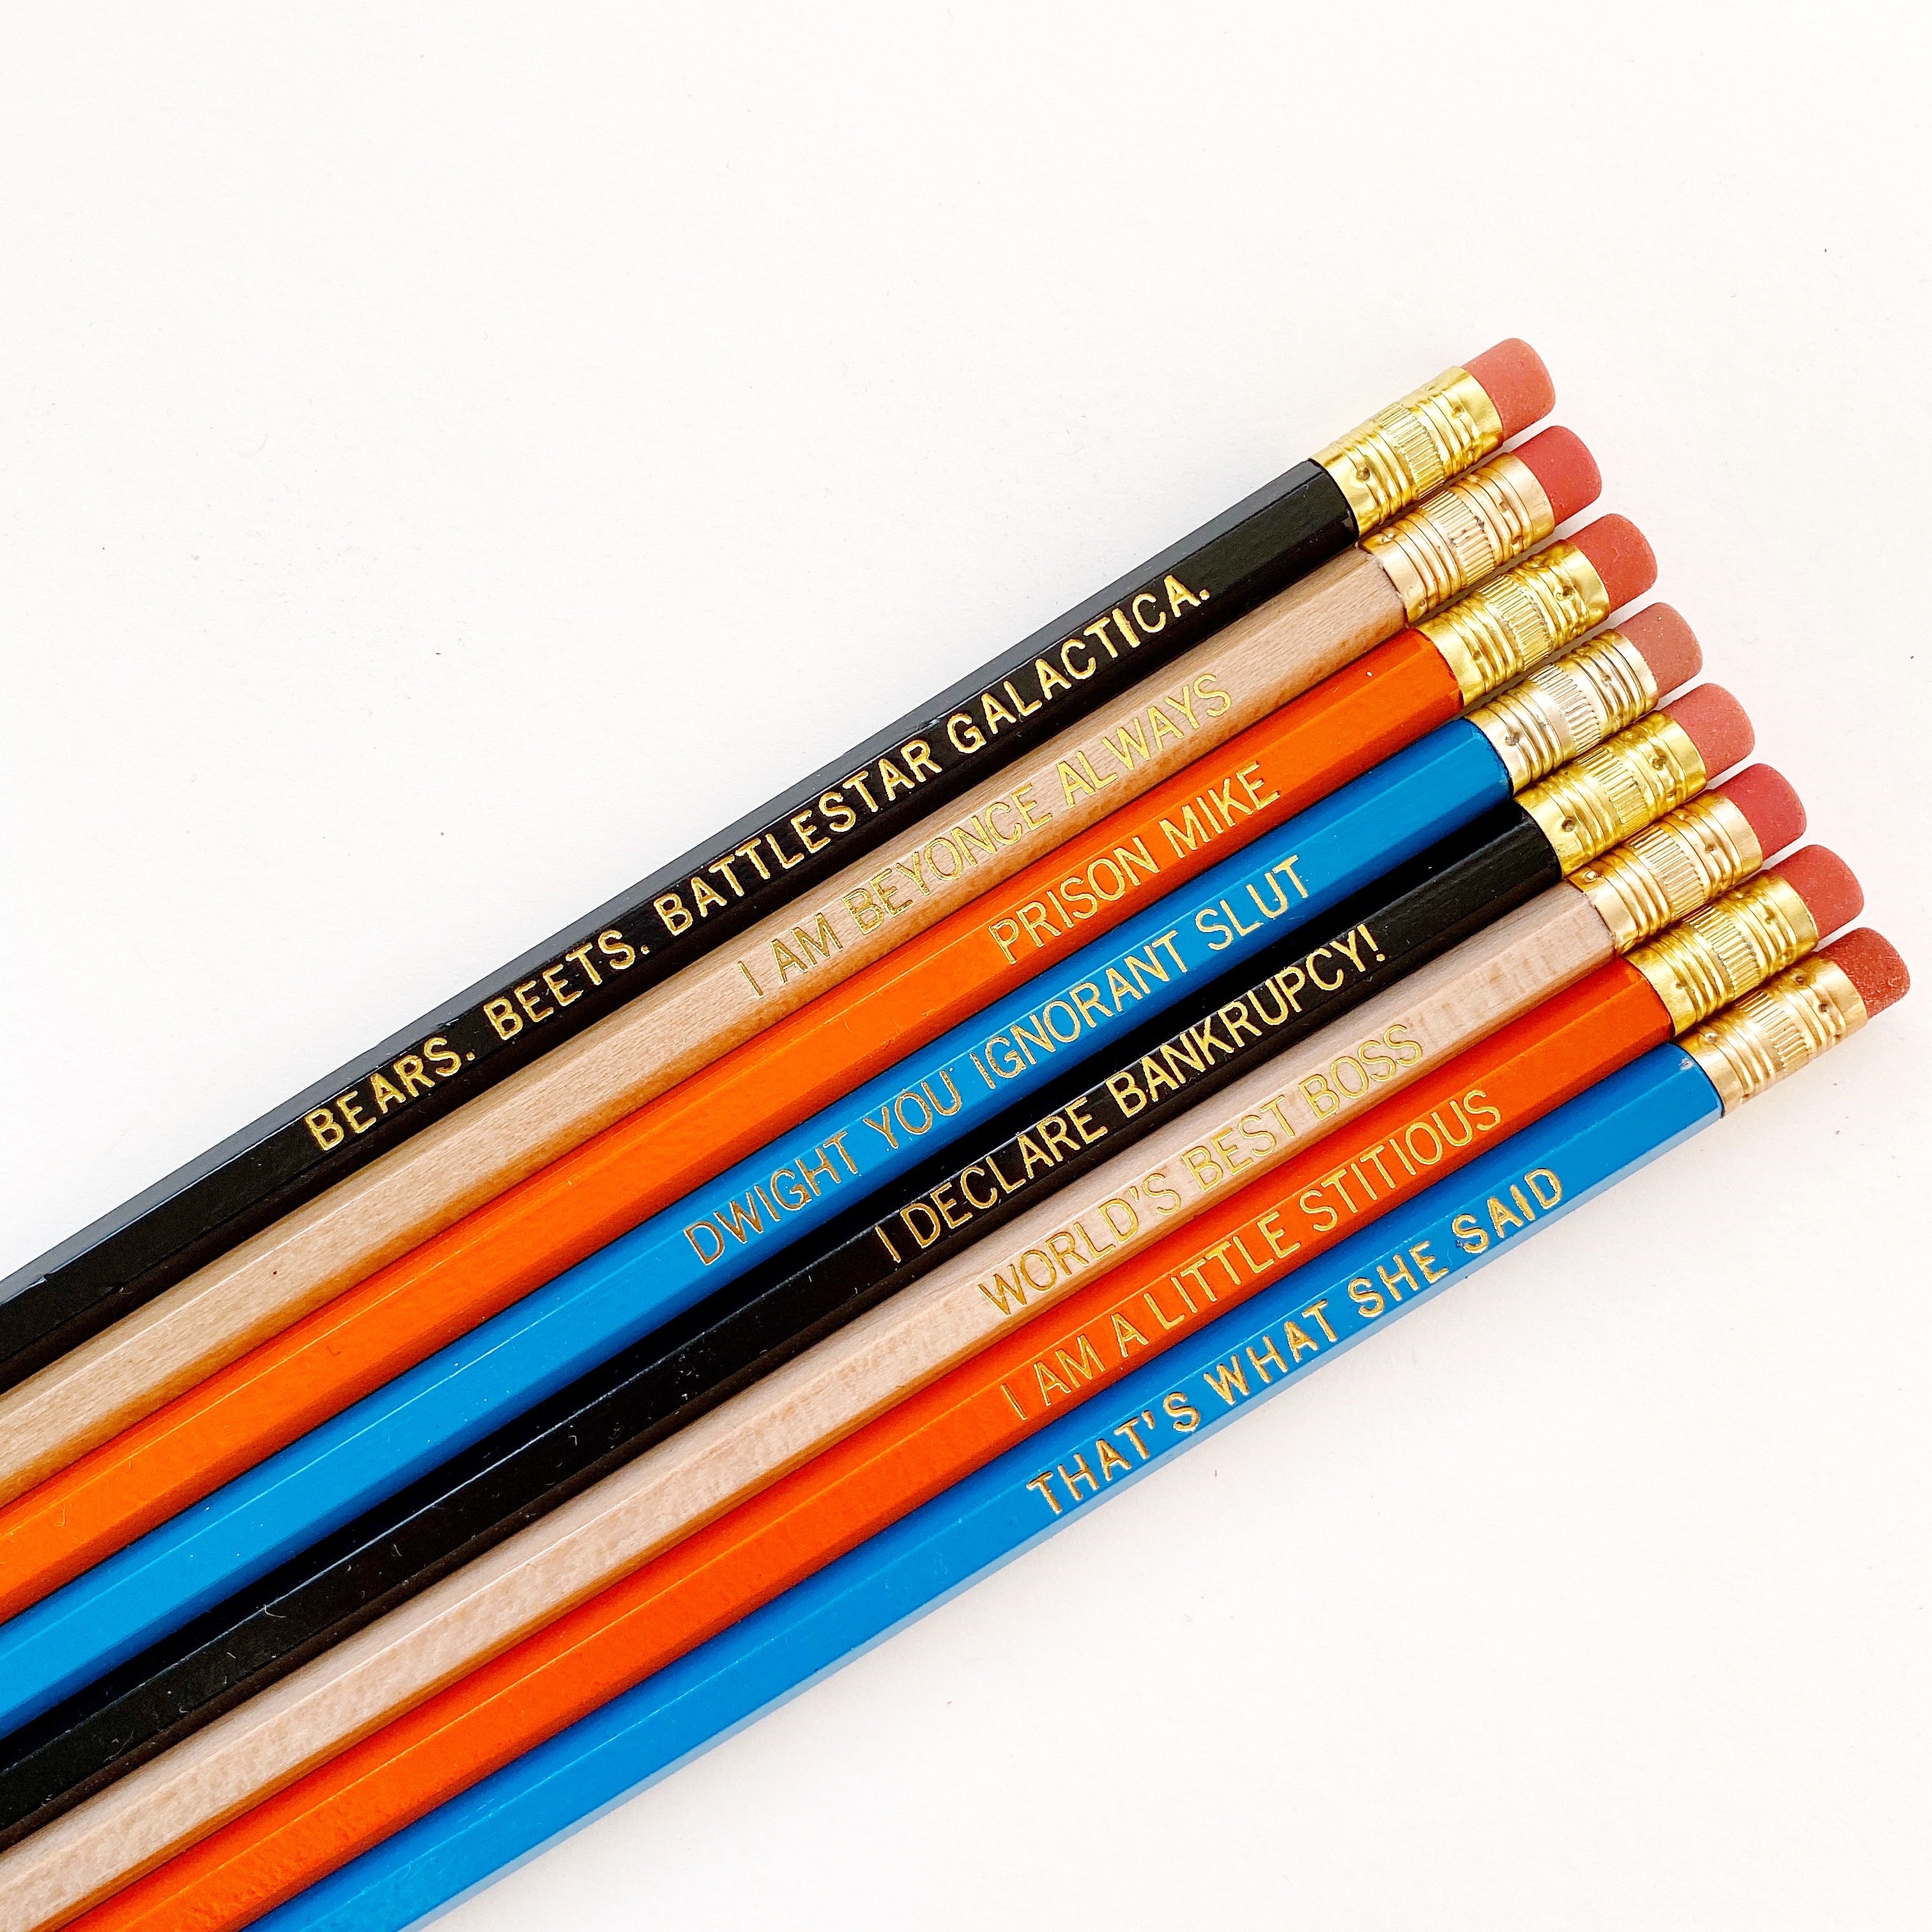 Image of pencil set in black, natural, orange and blue with gold text says, "Bears. Beets. Battlestar Galactica ","I am Beyonce Always ","Prison Mike ','Dwight You Ignorant Slut ','I Declare Bankruptcy! ","World's Best Boss ","I Am A Little Stitious ","That’s what she said"